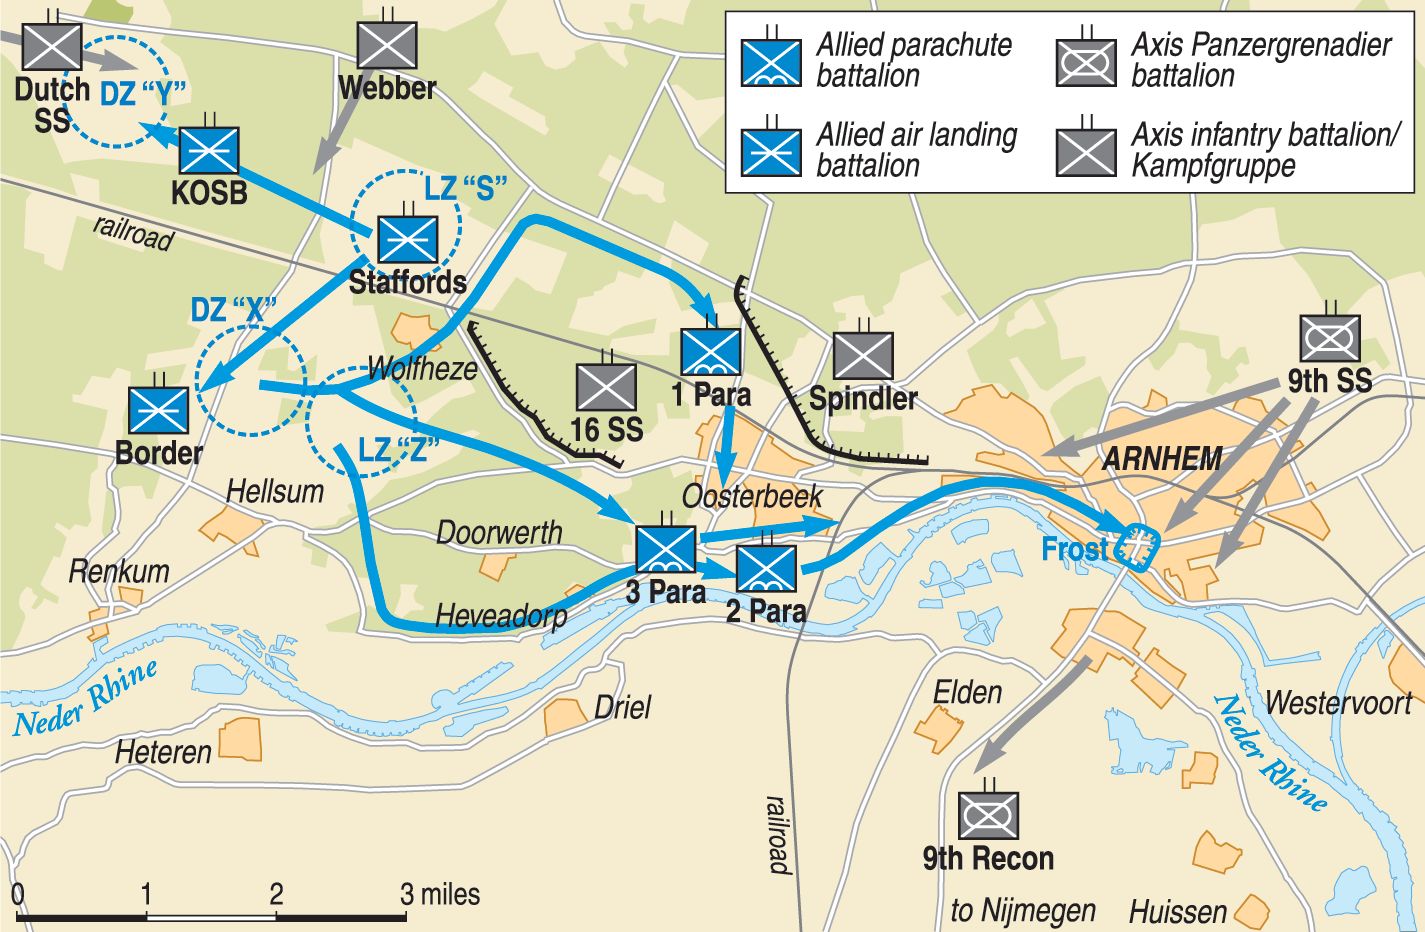 Isolated from the main body of the 1st Airborne Division, the British paras holding the south end of the bridge at Arnhem were seriously low on ammunition and other supplies within hours of reaching the town.